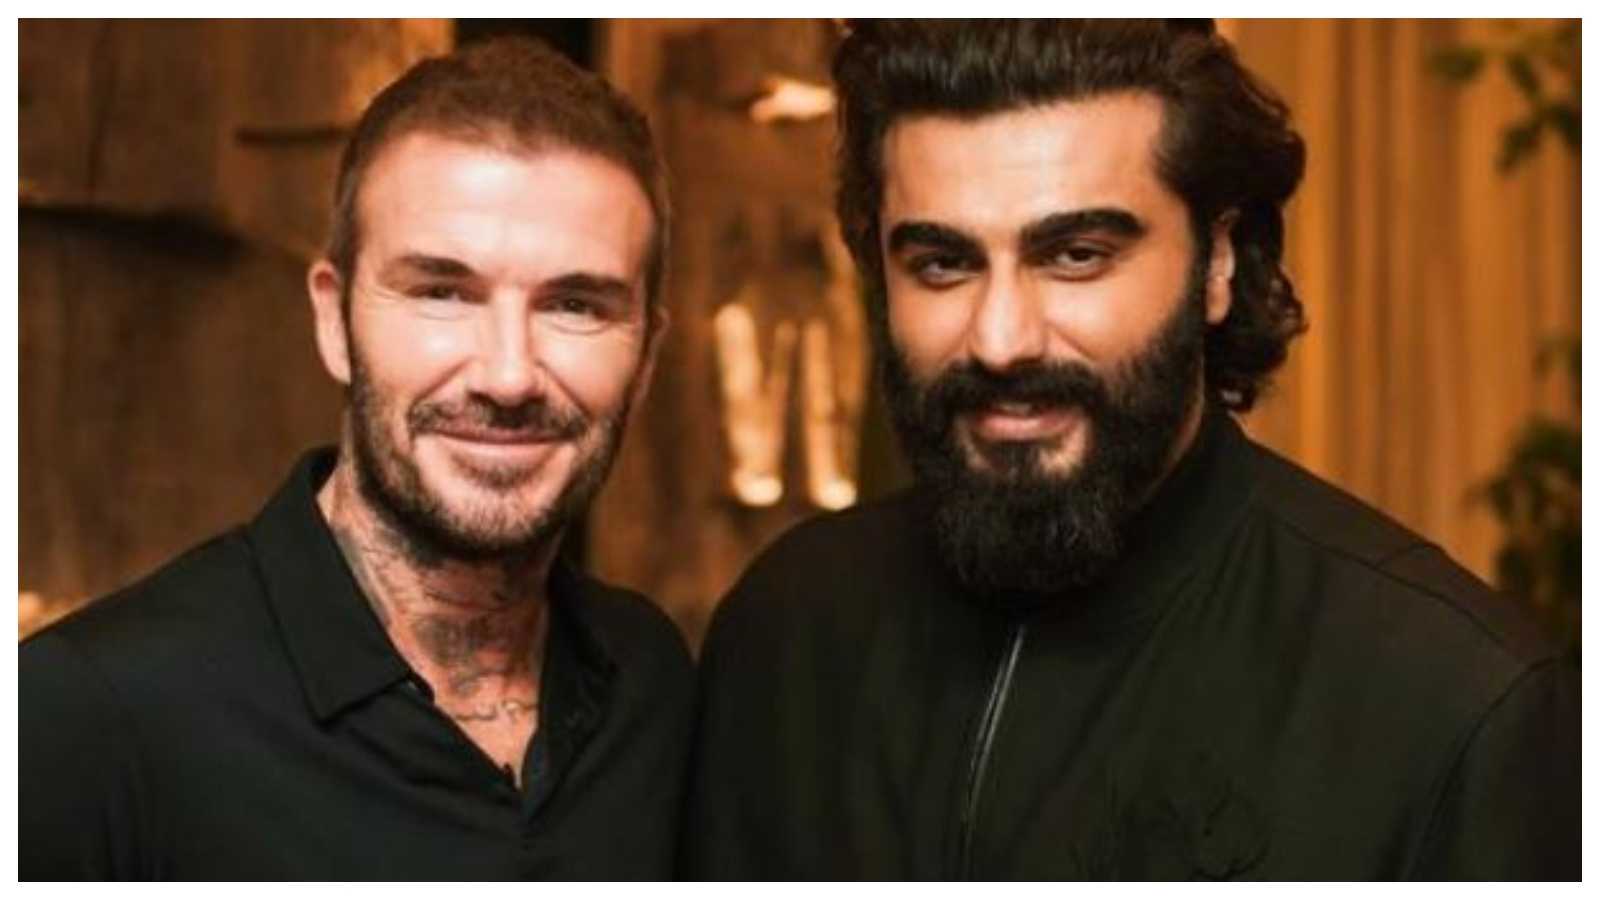 Arjun Kapoor gives a befitting reply to trolls slamming him for faking his height in picture with David Beckham